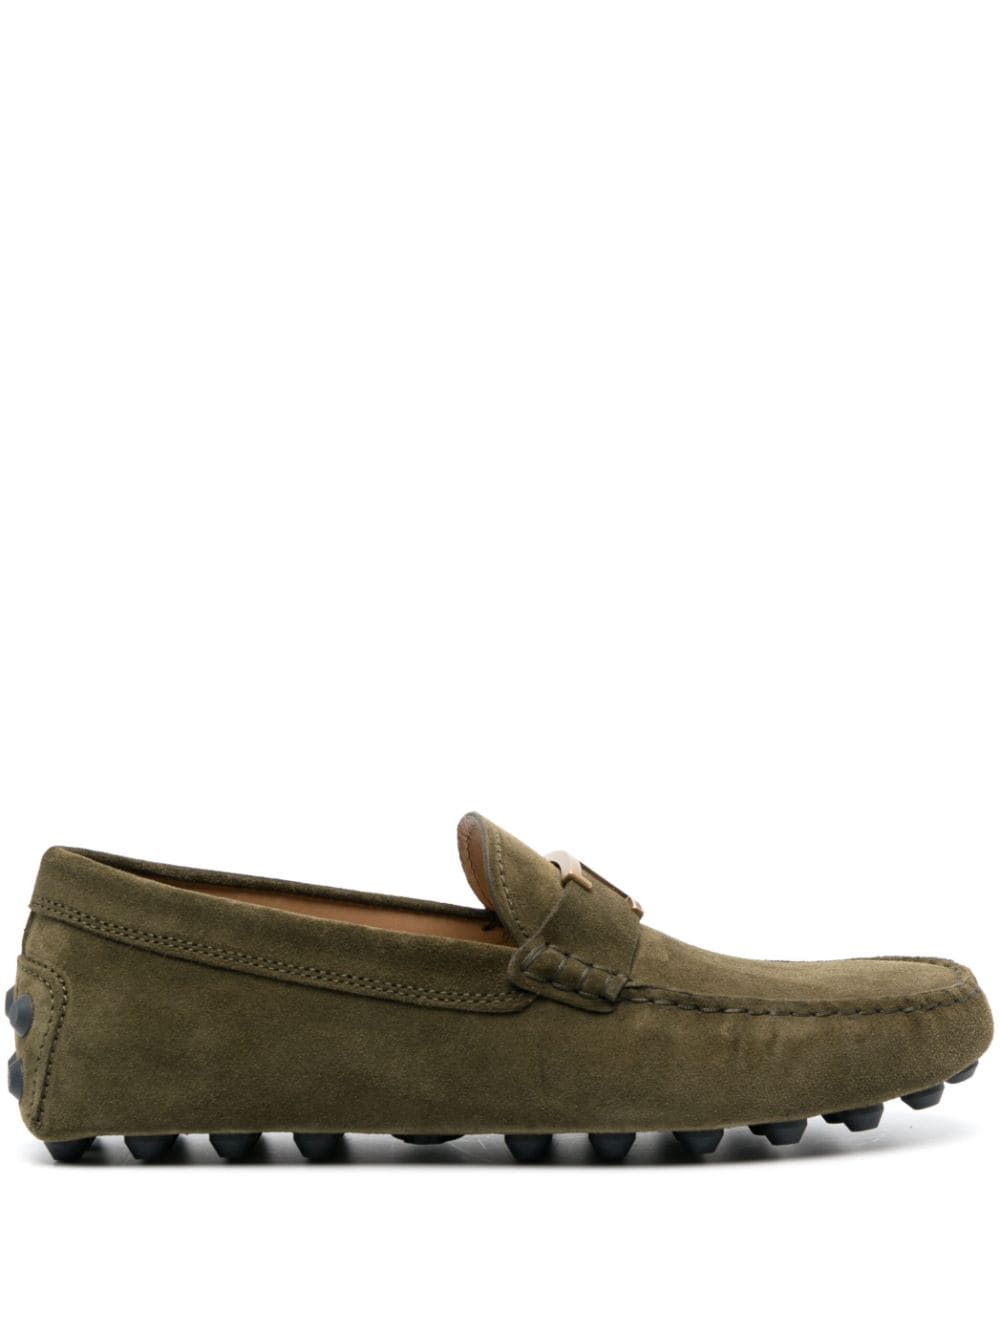 Tod's Gommino suede loafers - Green von Tod's